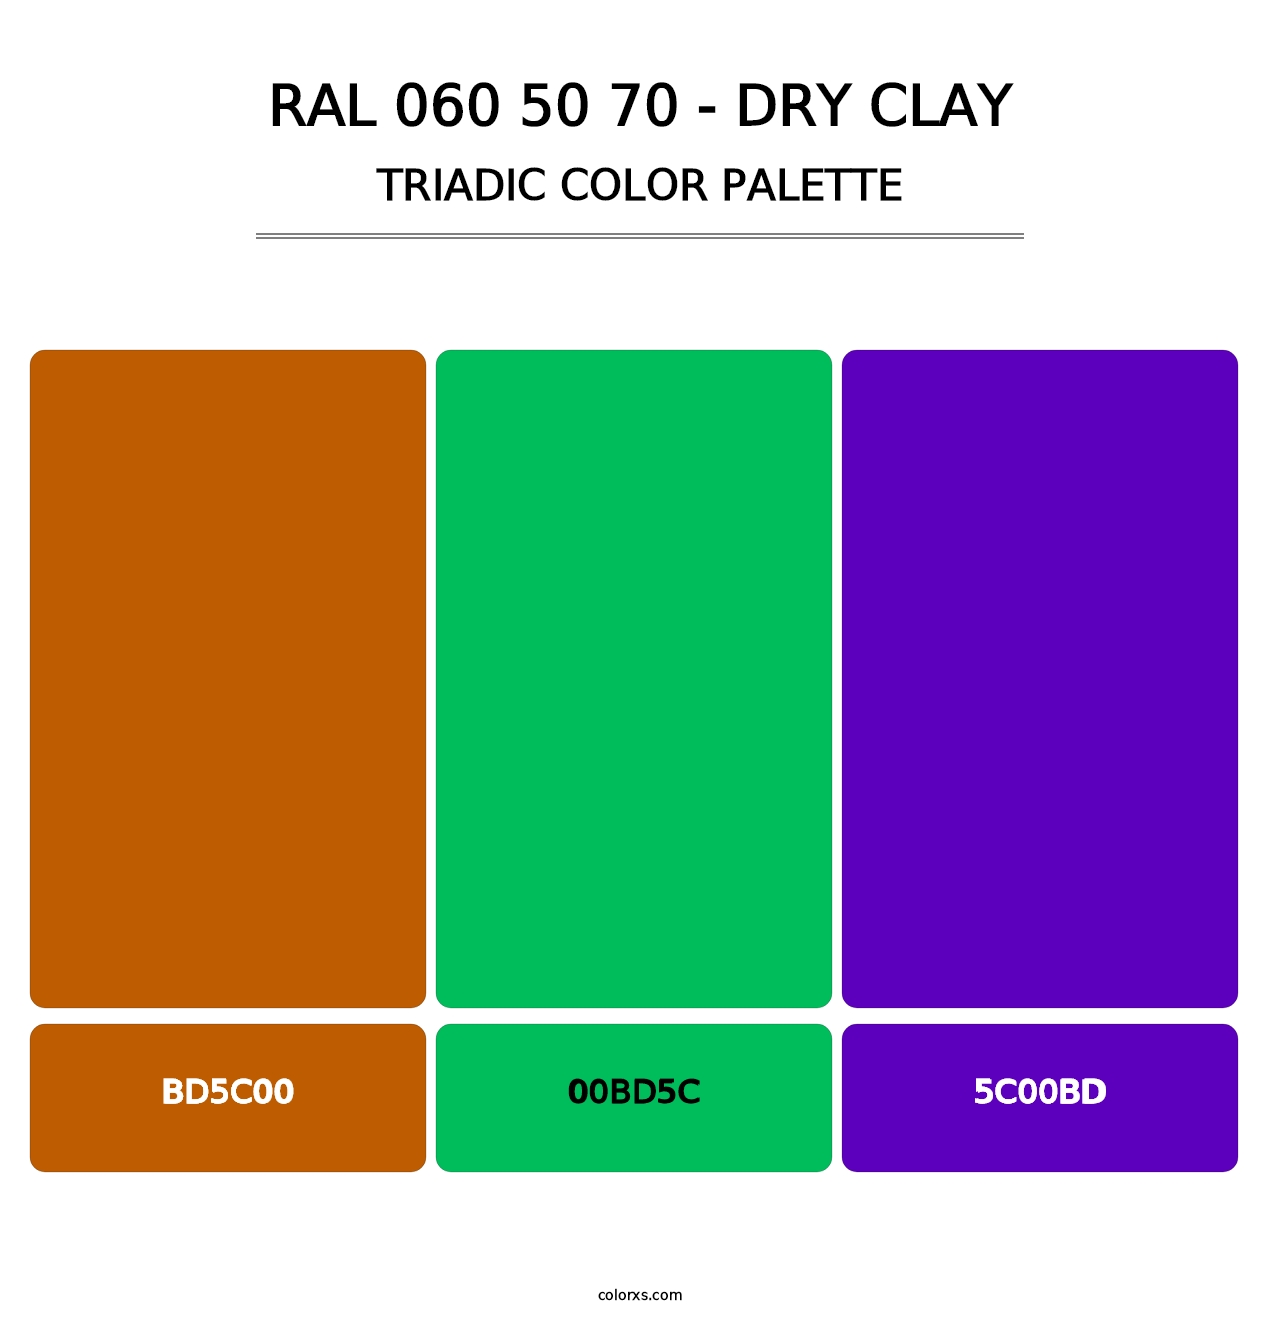 RAL 060 50 70 - Dry Clay - Triadic Color Palette